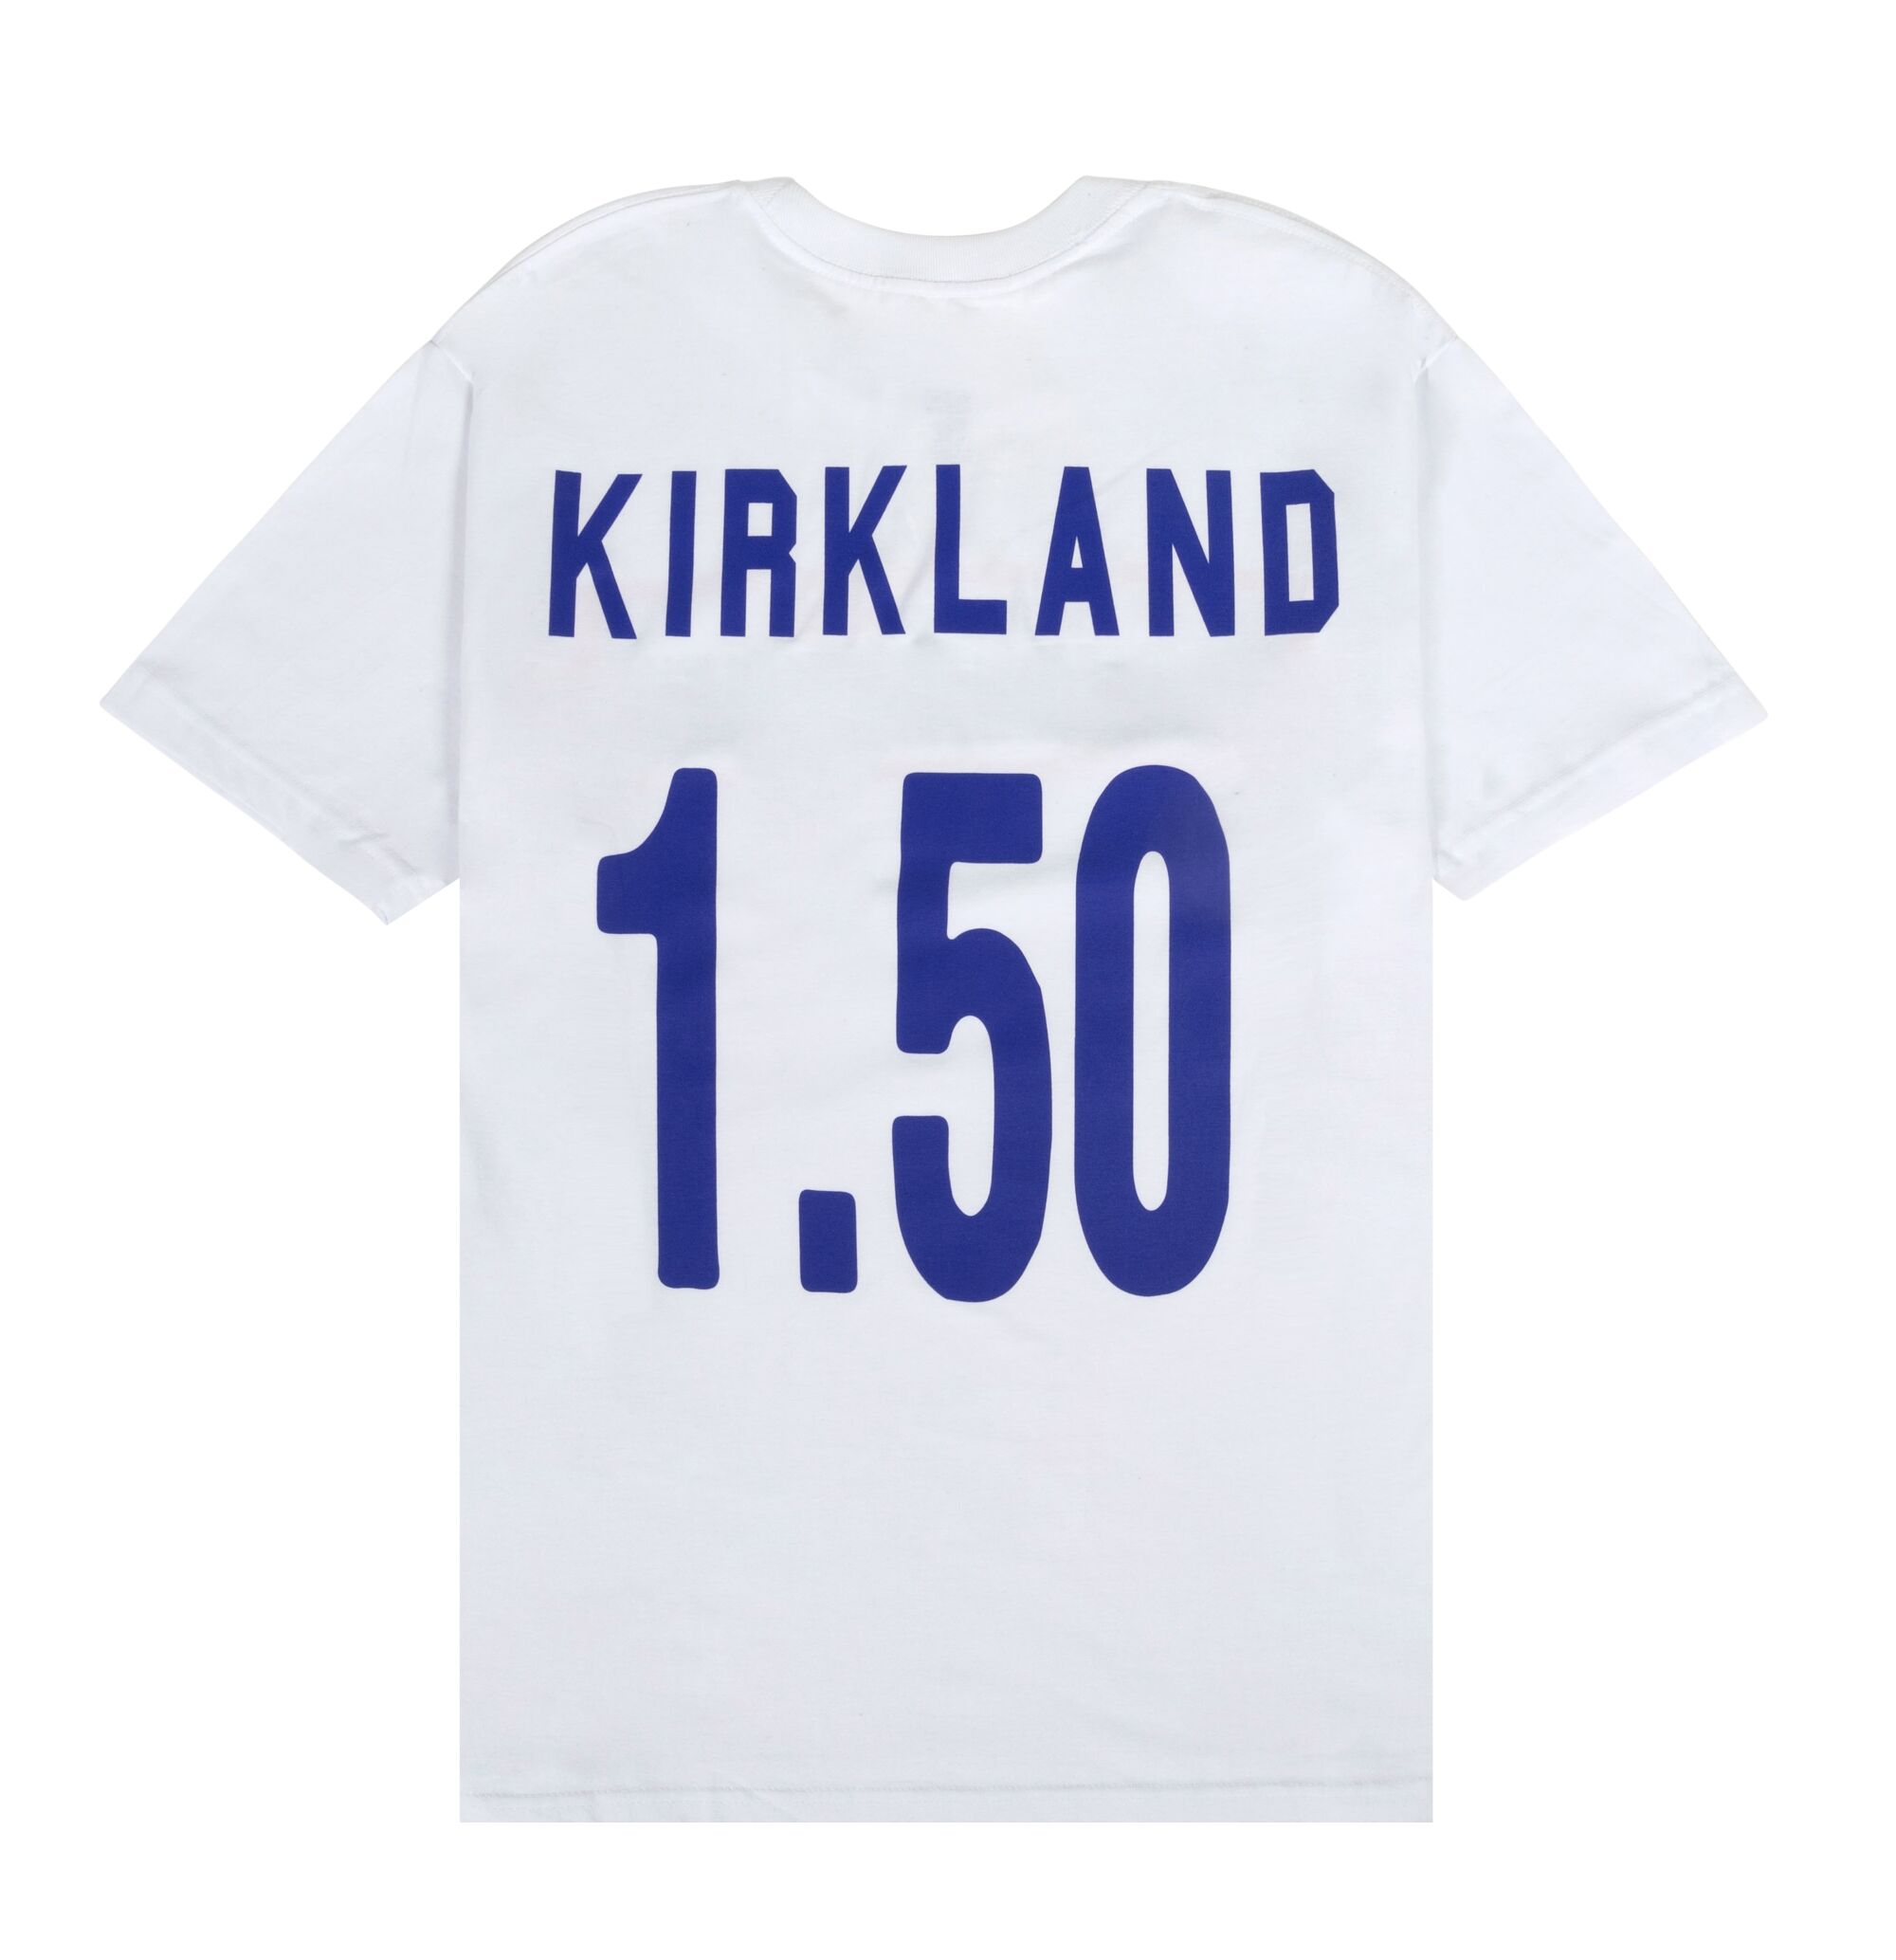 The white t-shirt pays homage to Costco's $1.50 hot dogs "1.50" in blue type